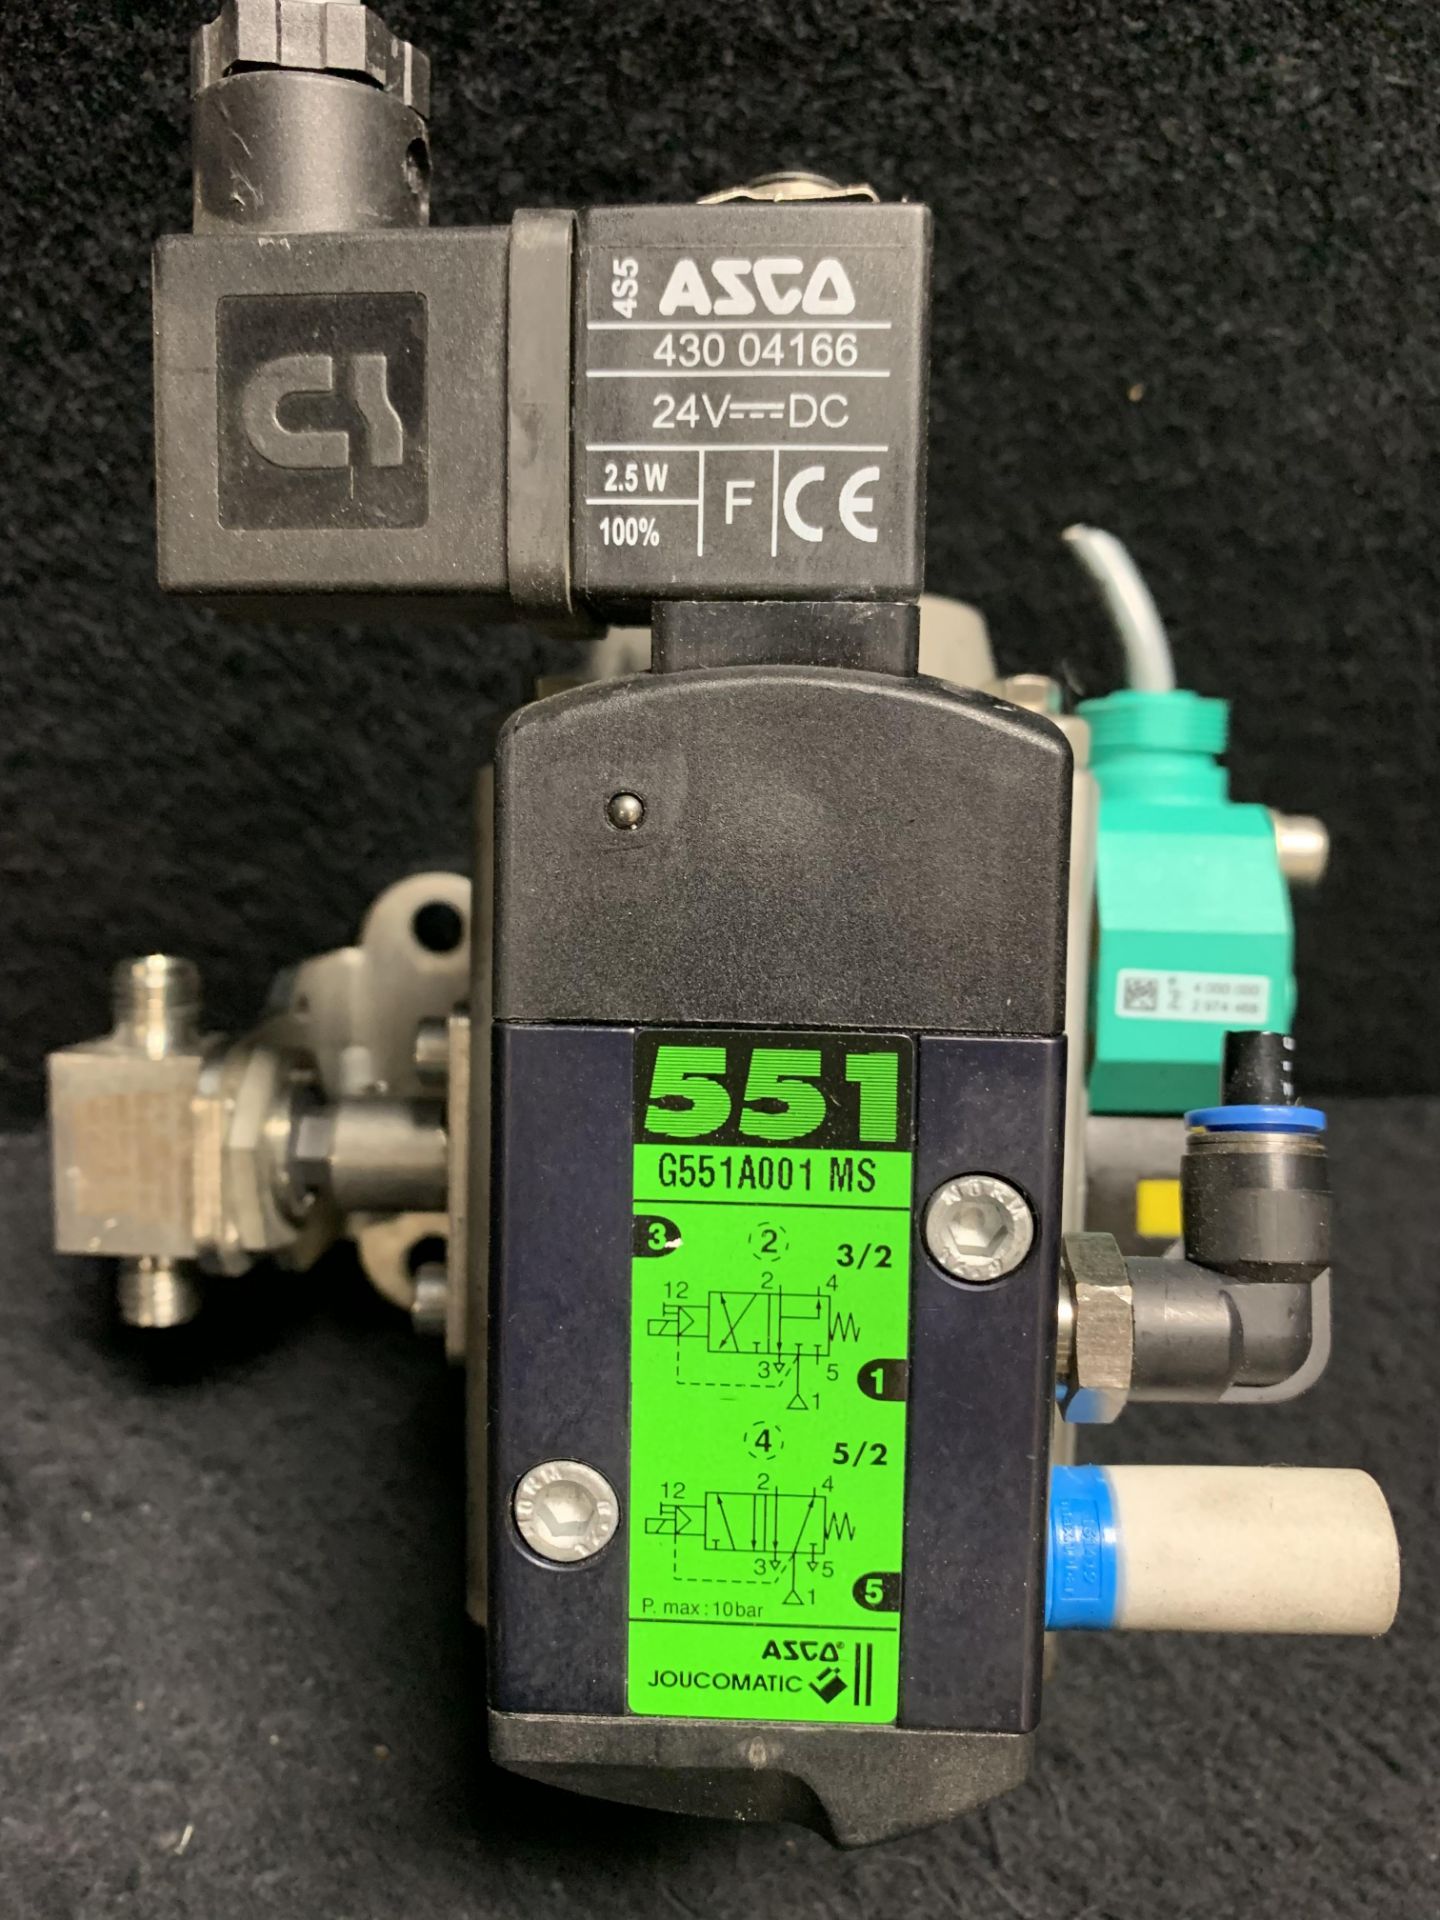 SWAGELOK SC15-4U F04-N-DS-11 AZNX AT SERIES PNEUMATIC ACTUATOR WITH ASCO G551A001 MS SOLENOID VALVE - Image 7 of 7